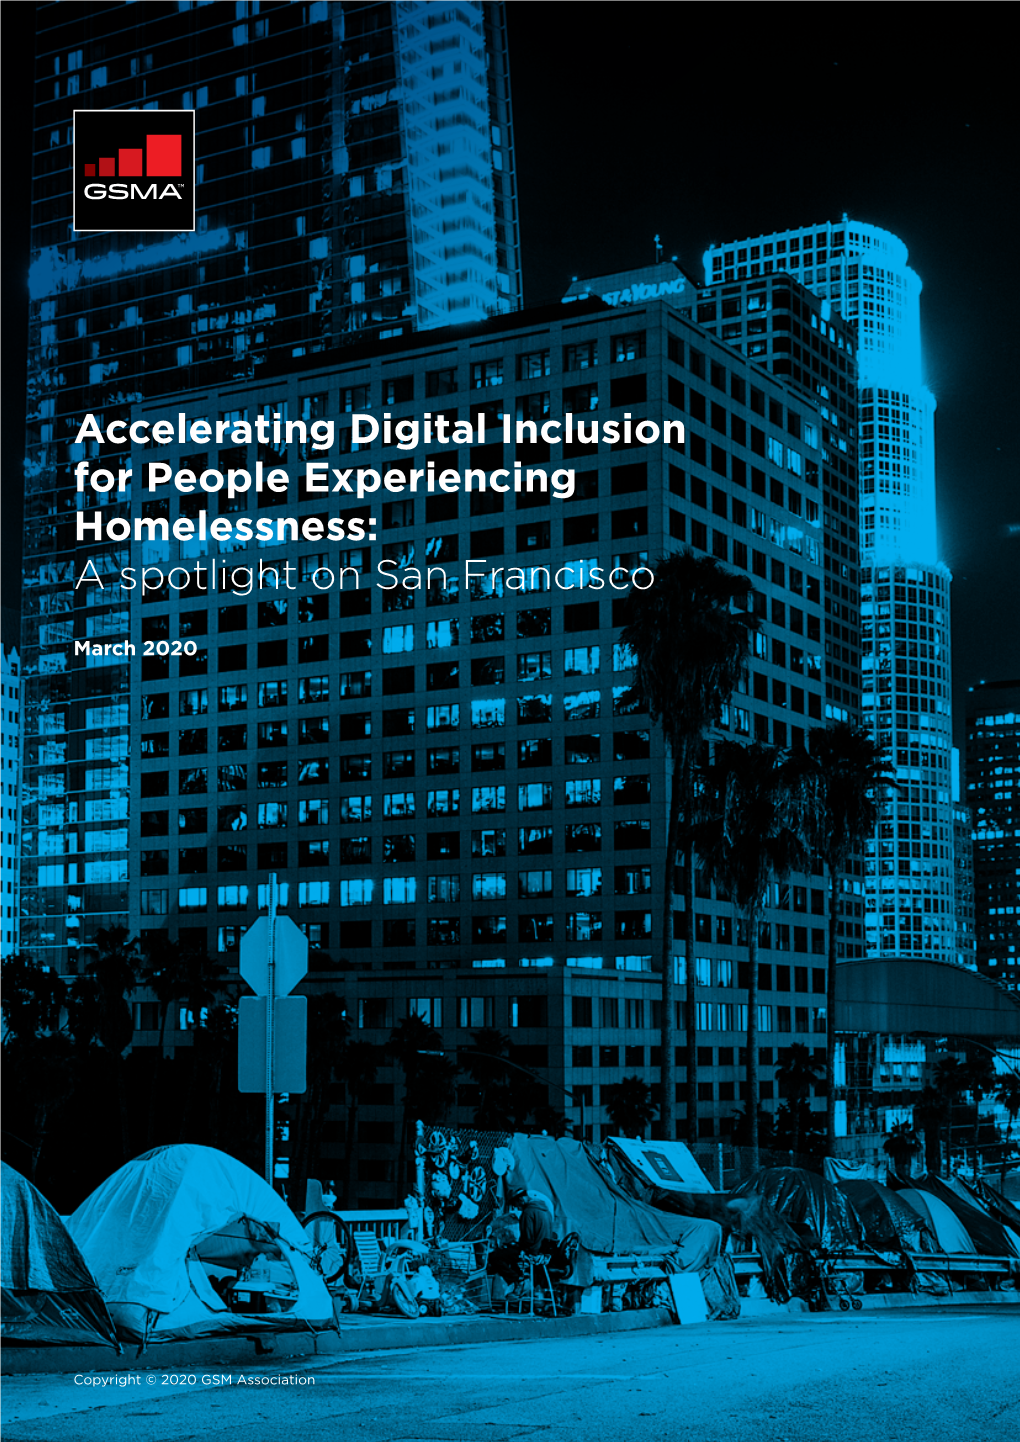 Accelerating Digital Inclusion for People Experiencing Homelessness: a Spotlight on San Francisco